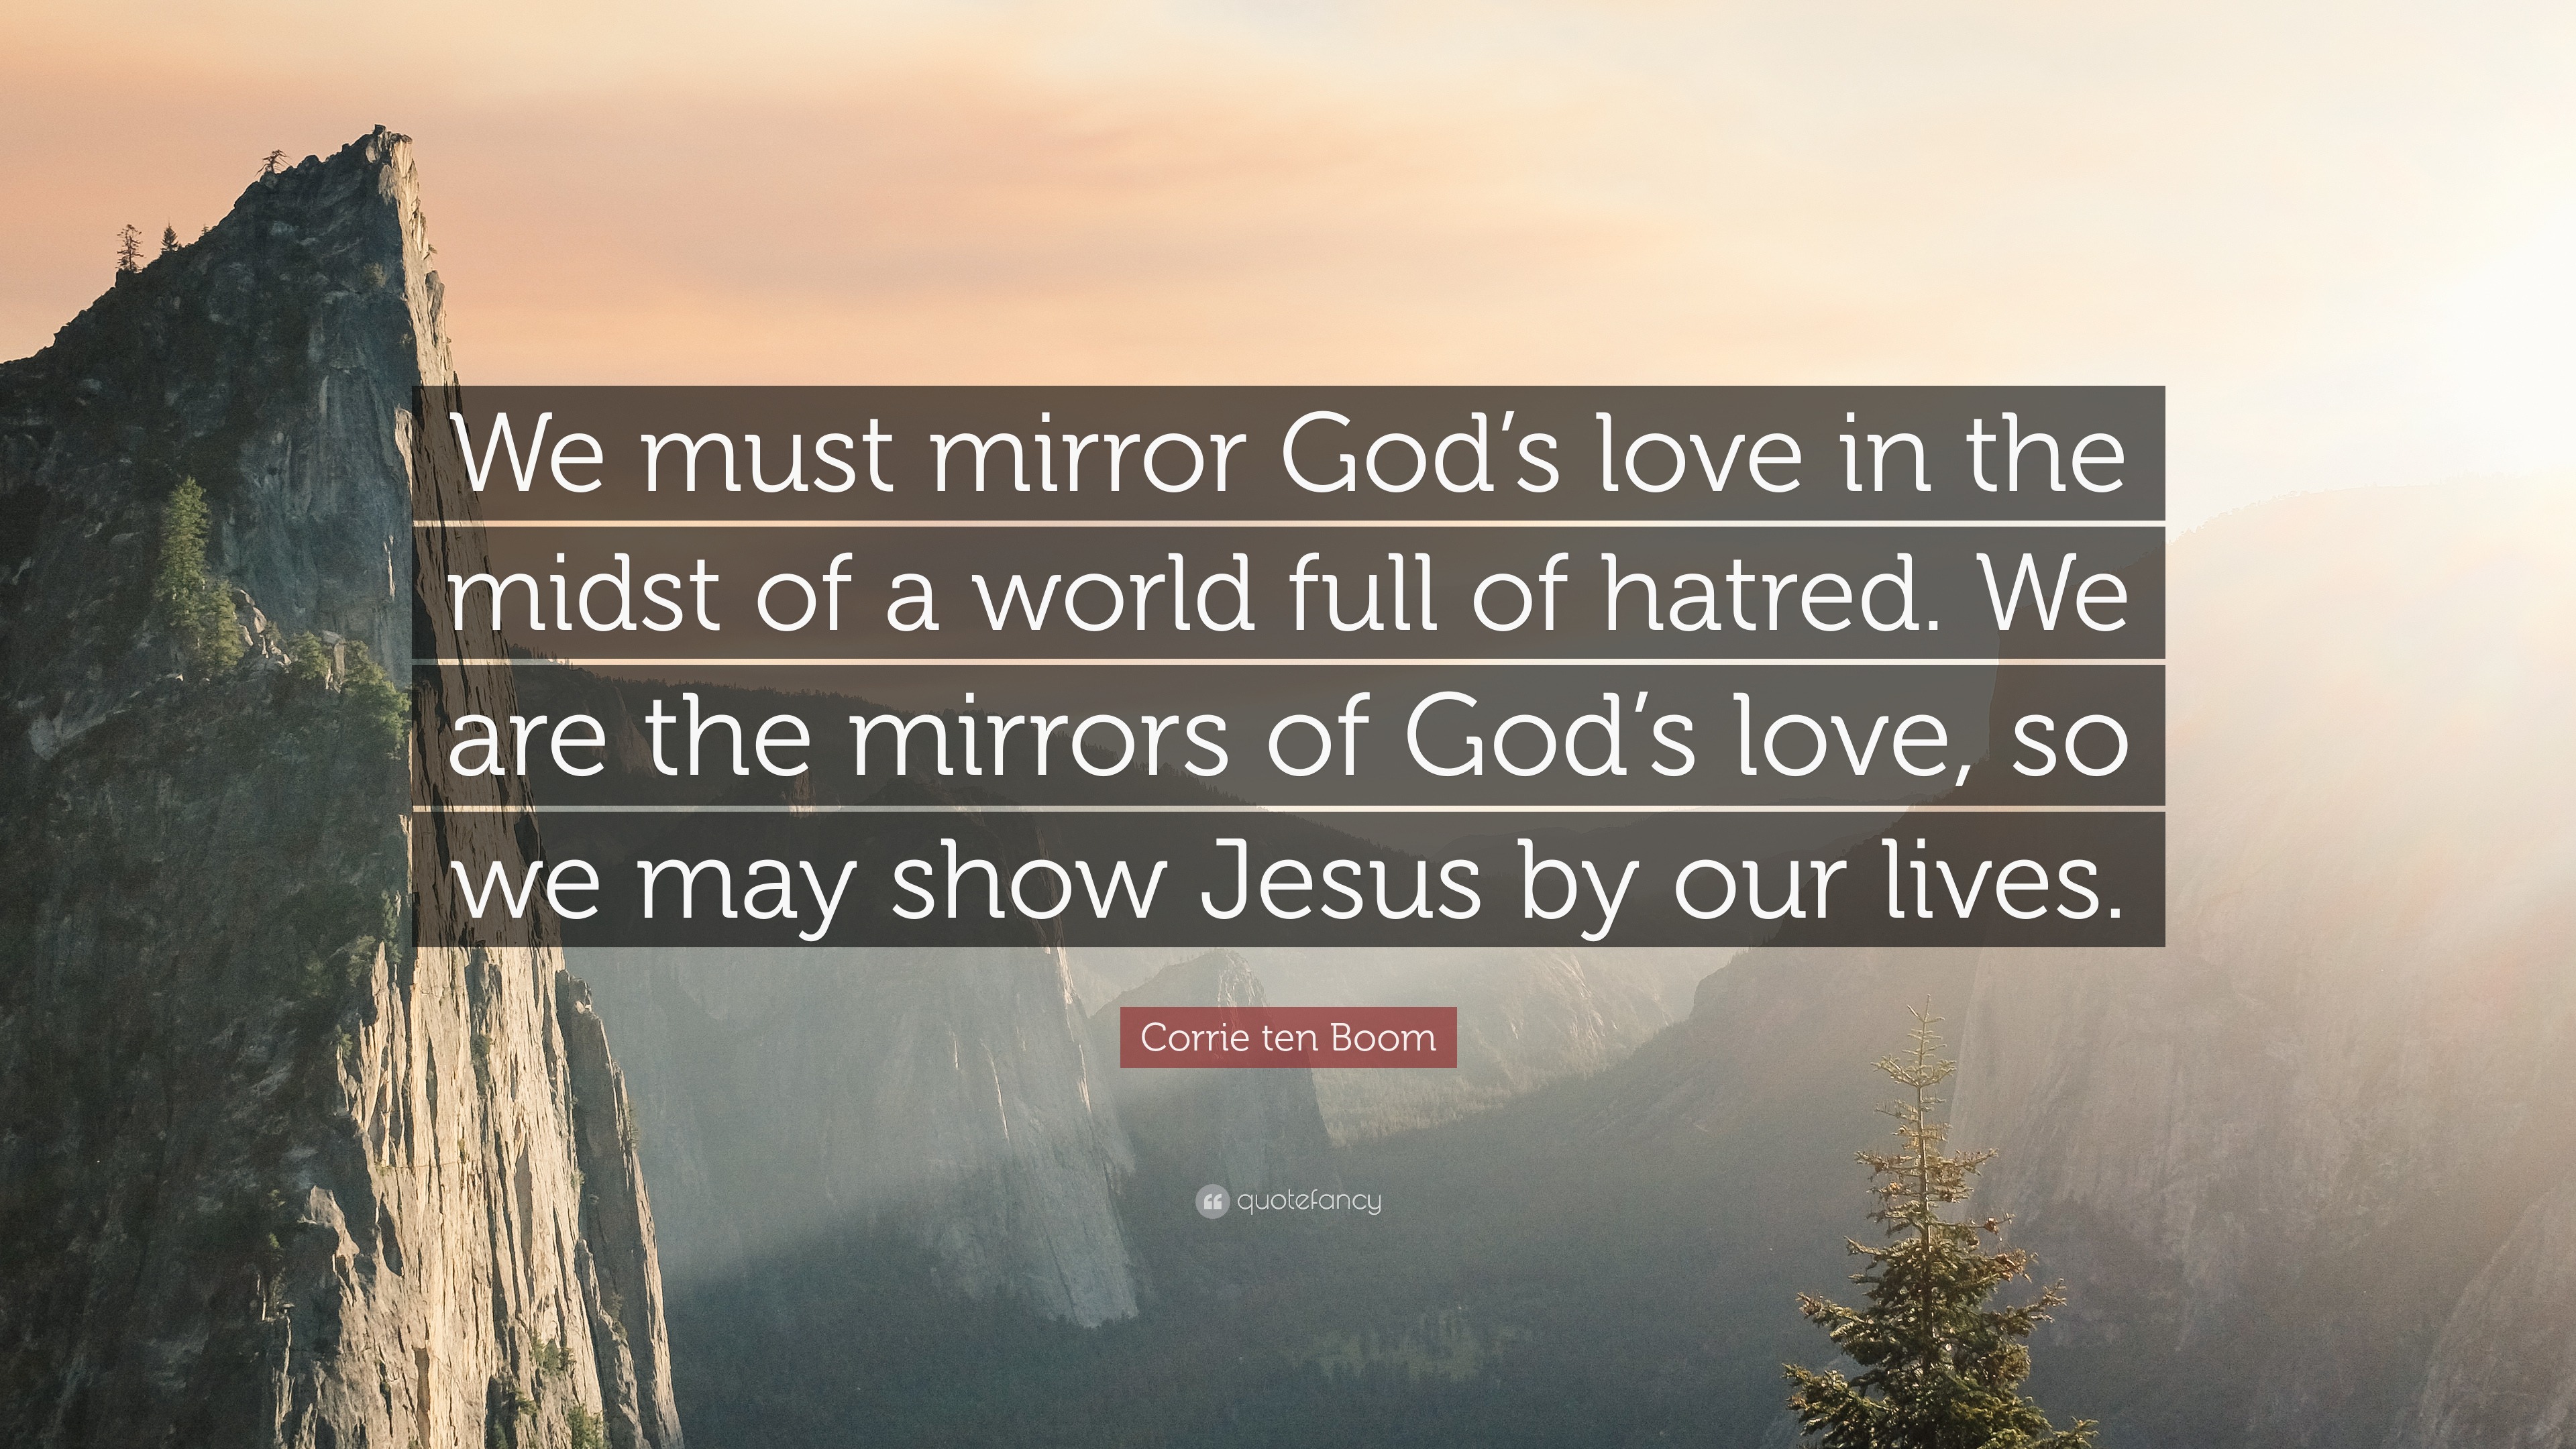 Corrie ten Boom Quote: "We must mirror God's love in the midst of a world full of hatred. We are ...